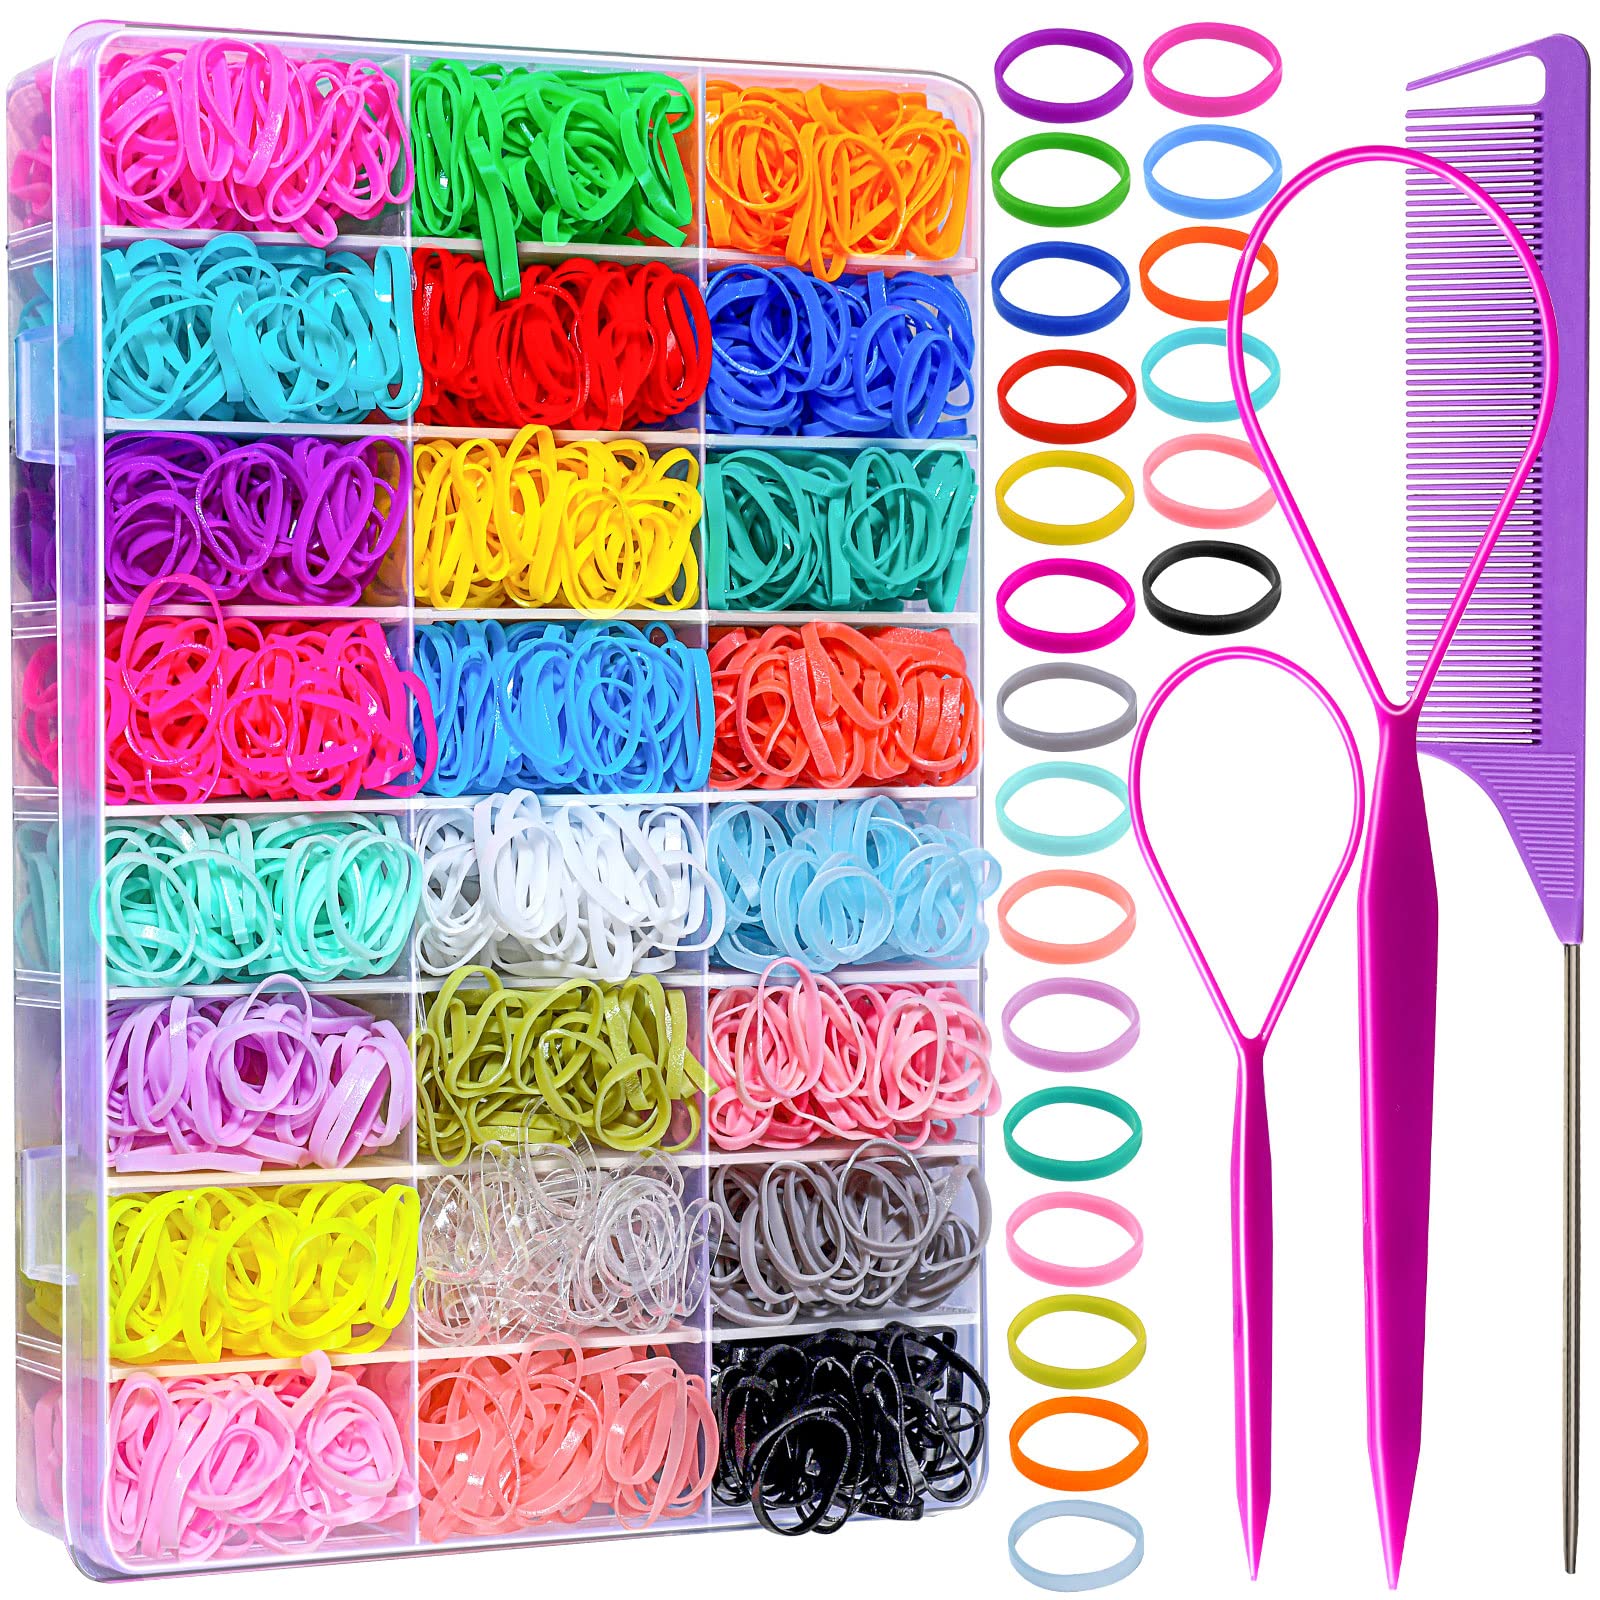 Elastic Hair Bands 24 Colors, YGDZ 1500 pcs Mini Hair Rubber Bands with Organizer Box, Soft Small Girl Hair Ties, Colorful Baby Rubber Bands Set with Hair Tail Tools, Rat Tail Comb for Kid Toddlers